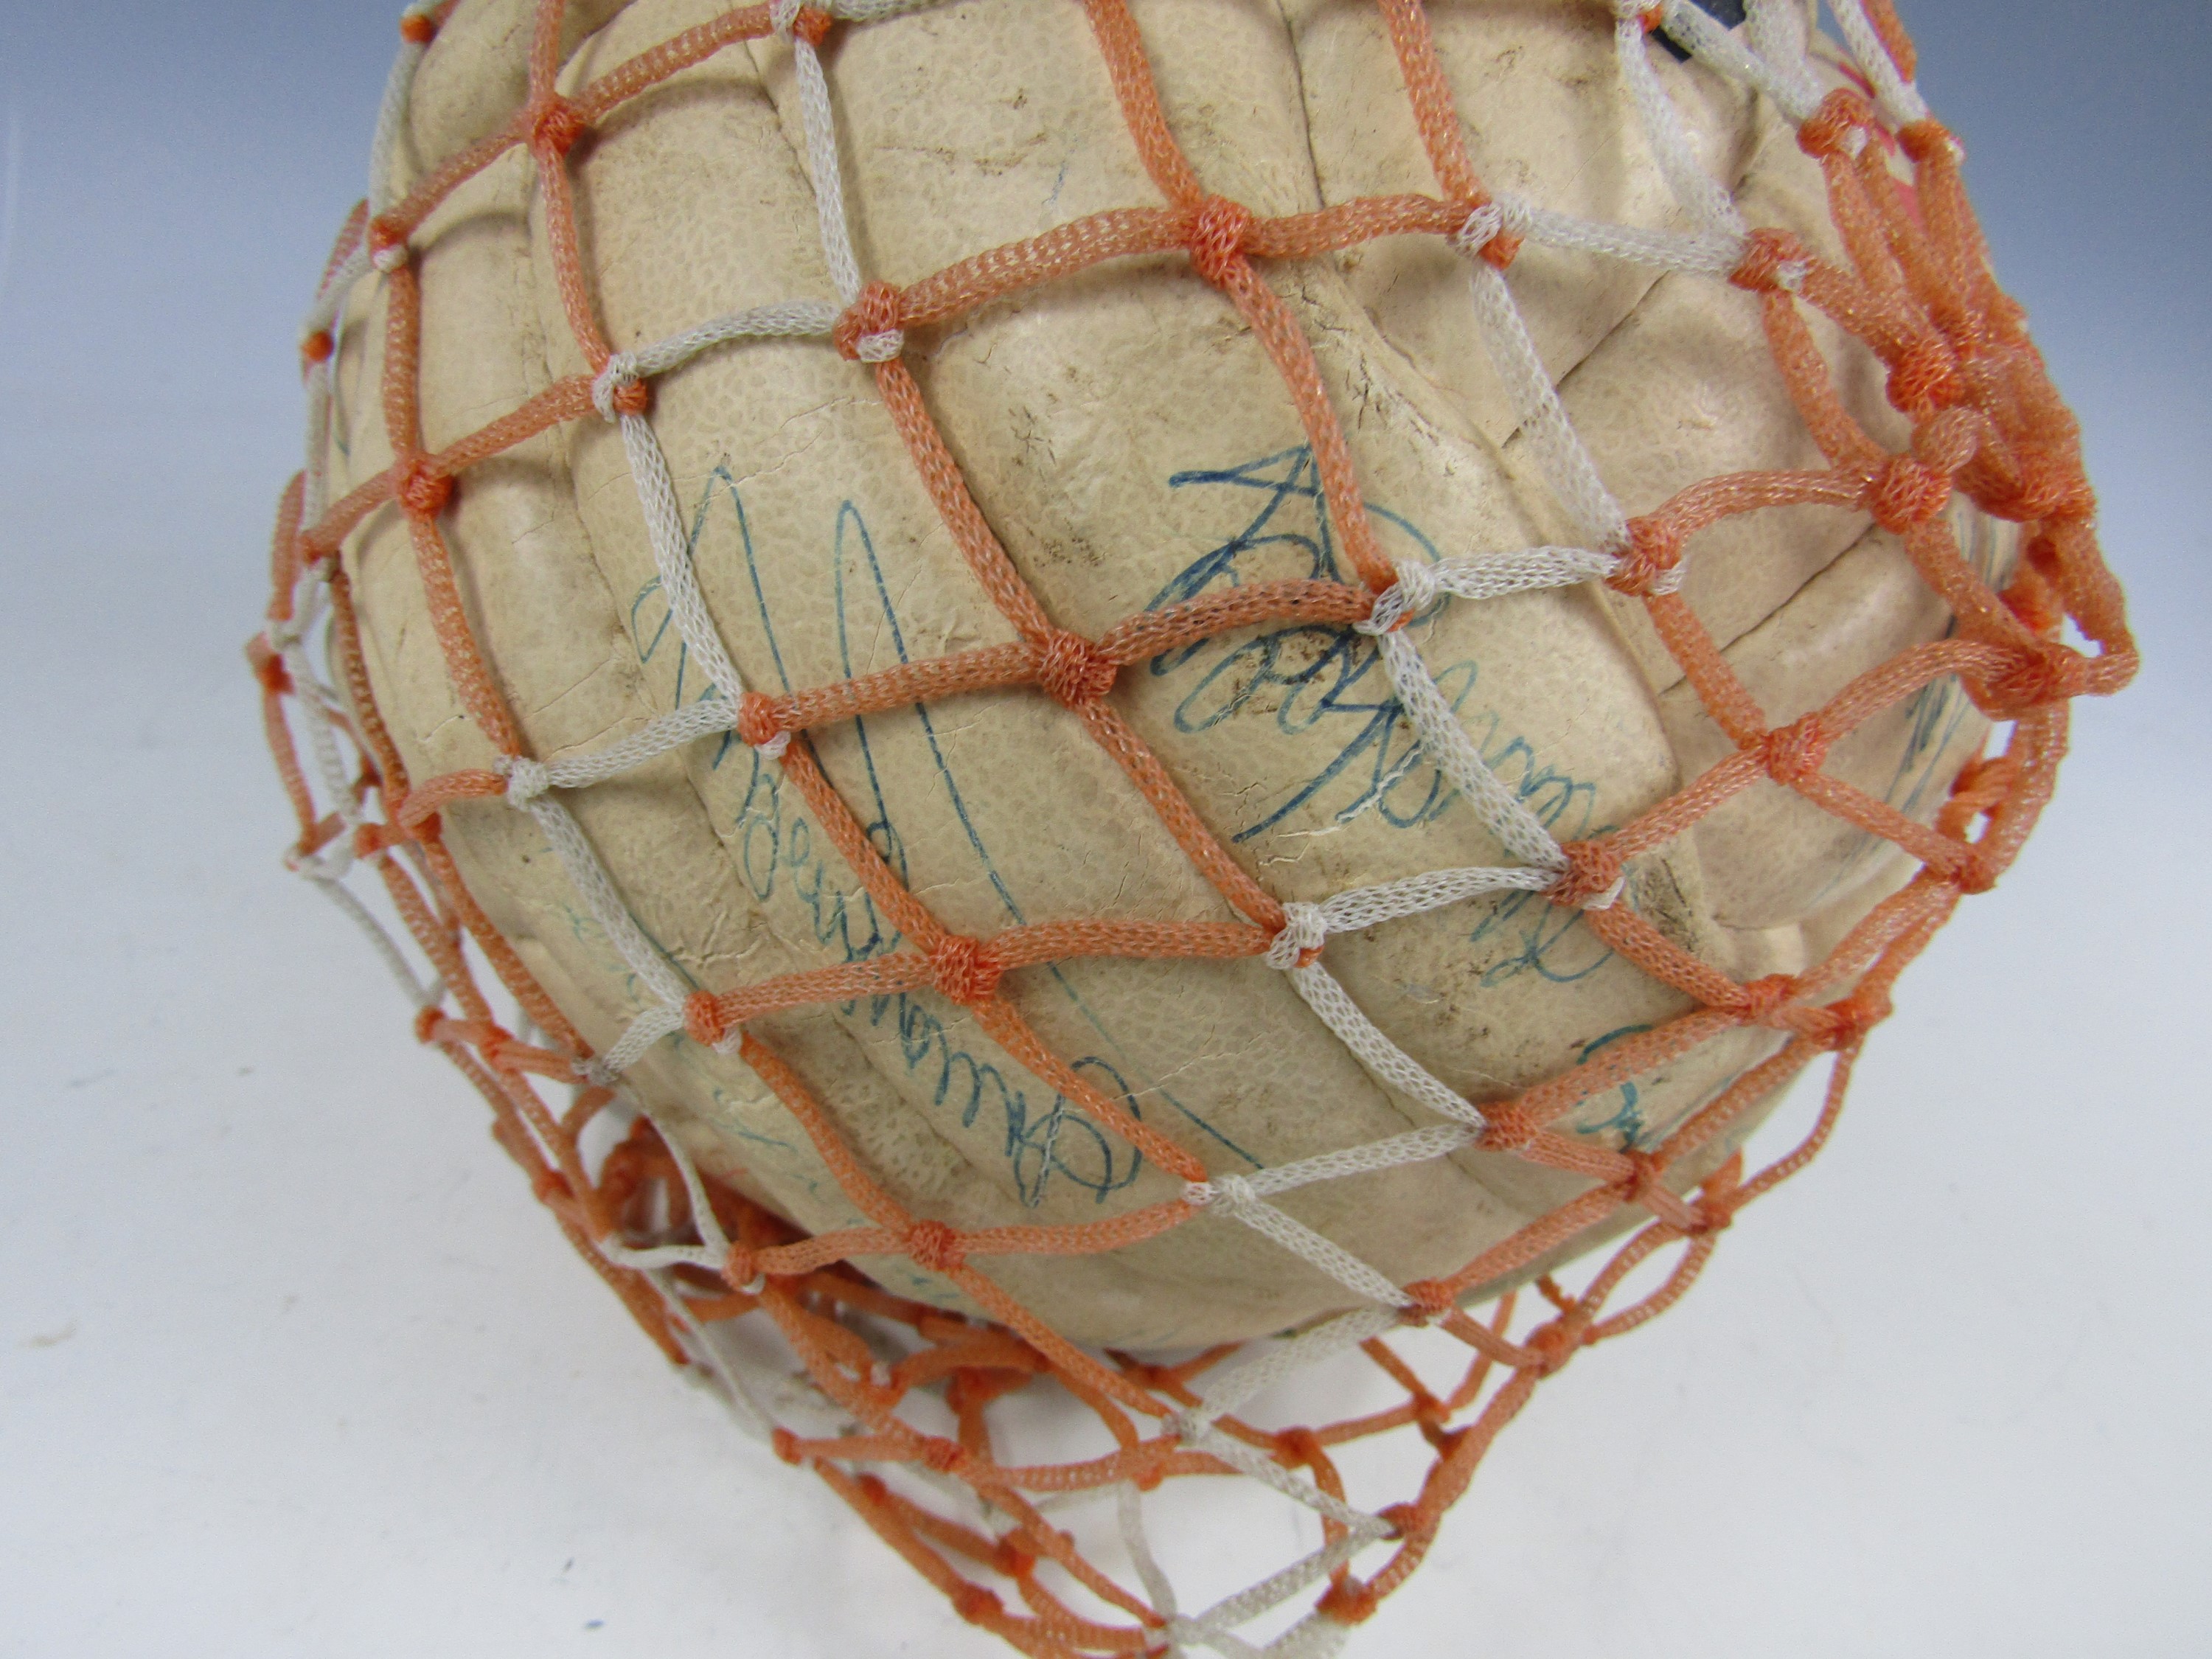 [Autographs] A white Minerva Super leather football signed by the England national football squad, - Image 2 of 3